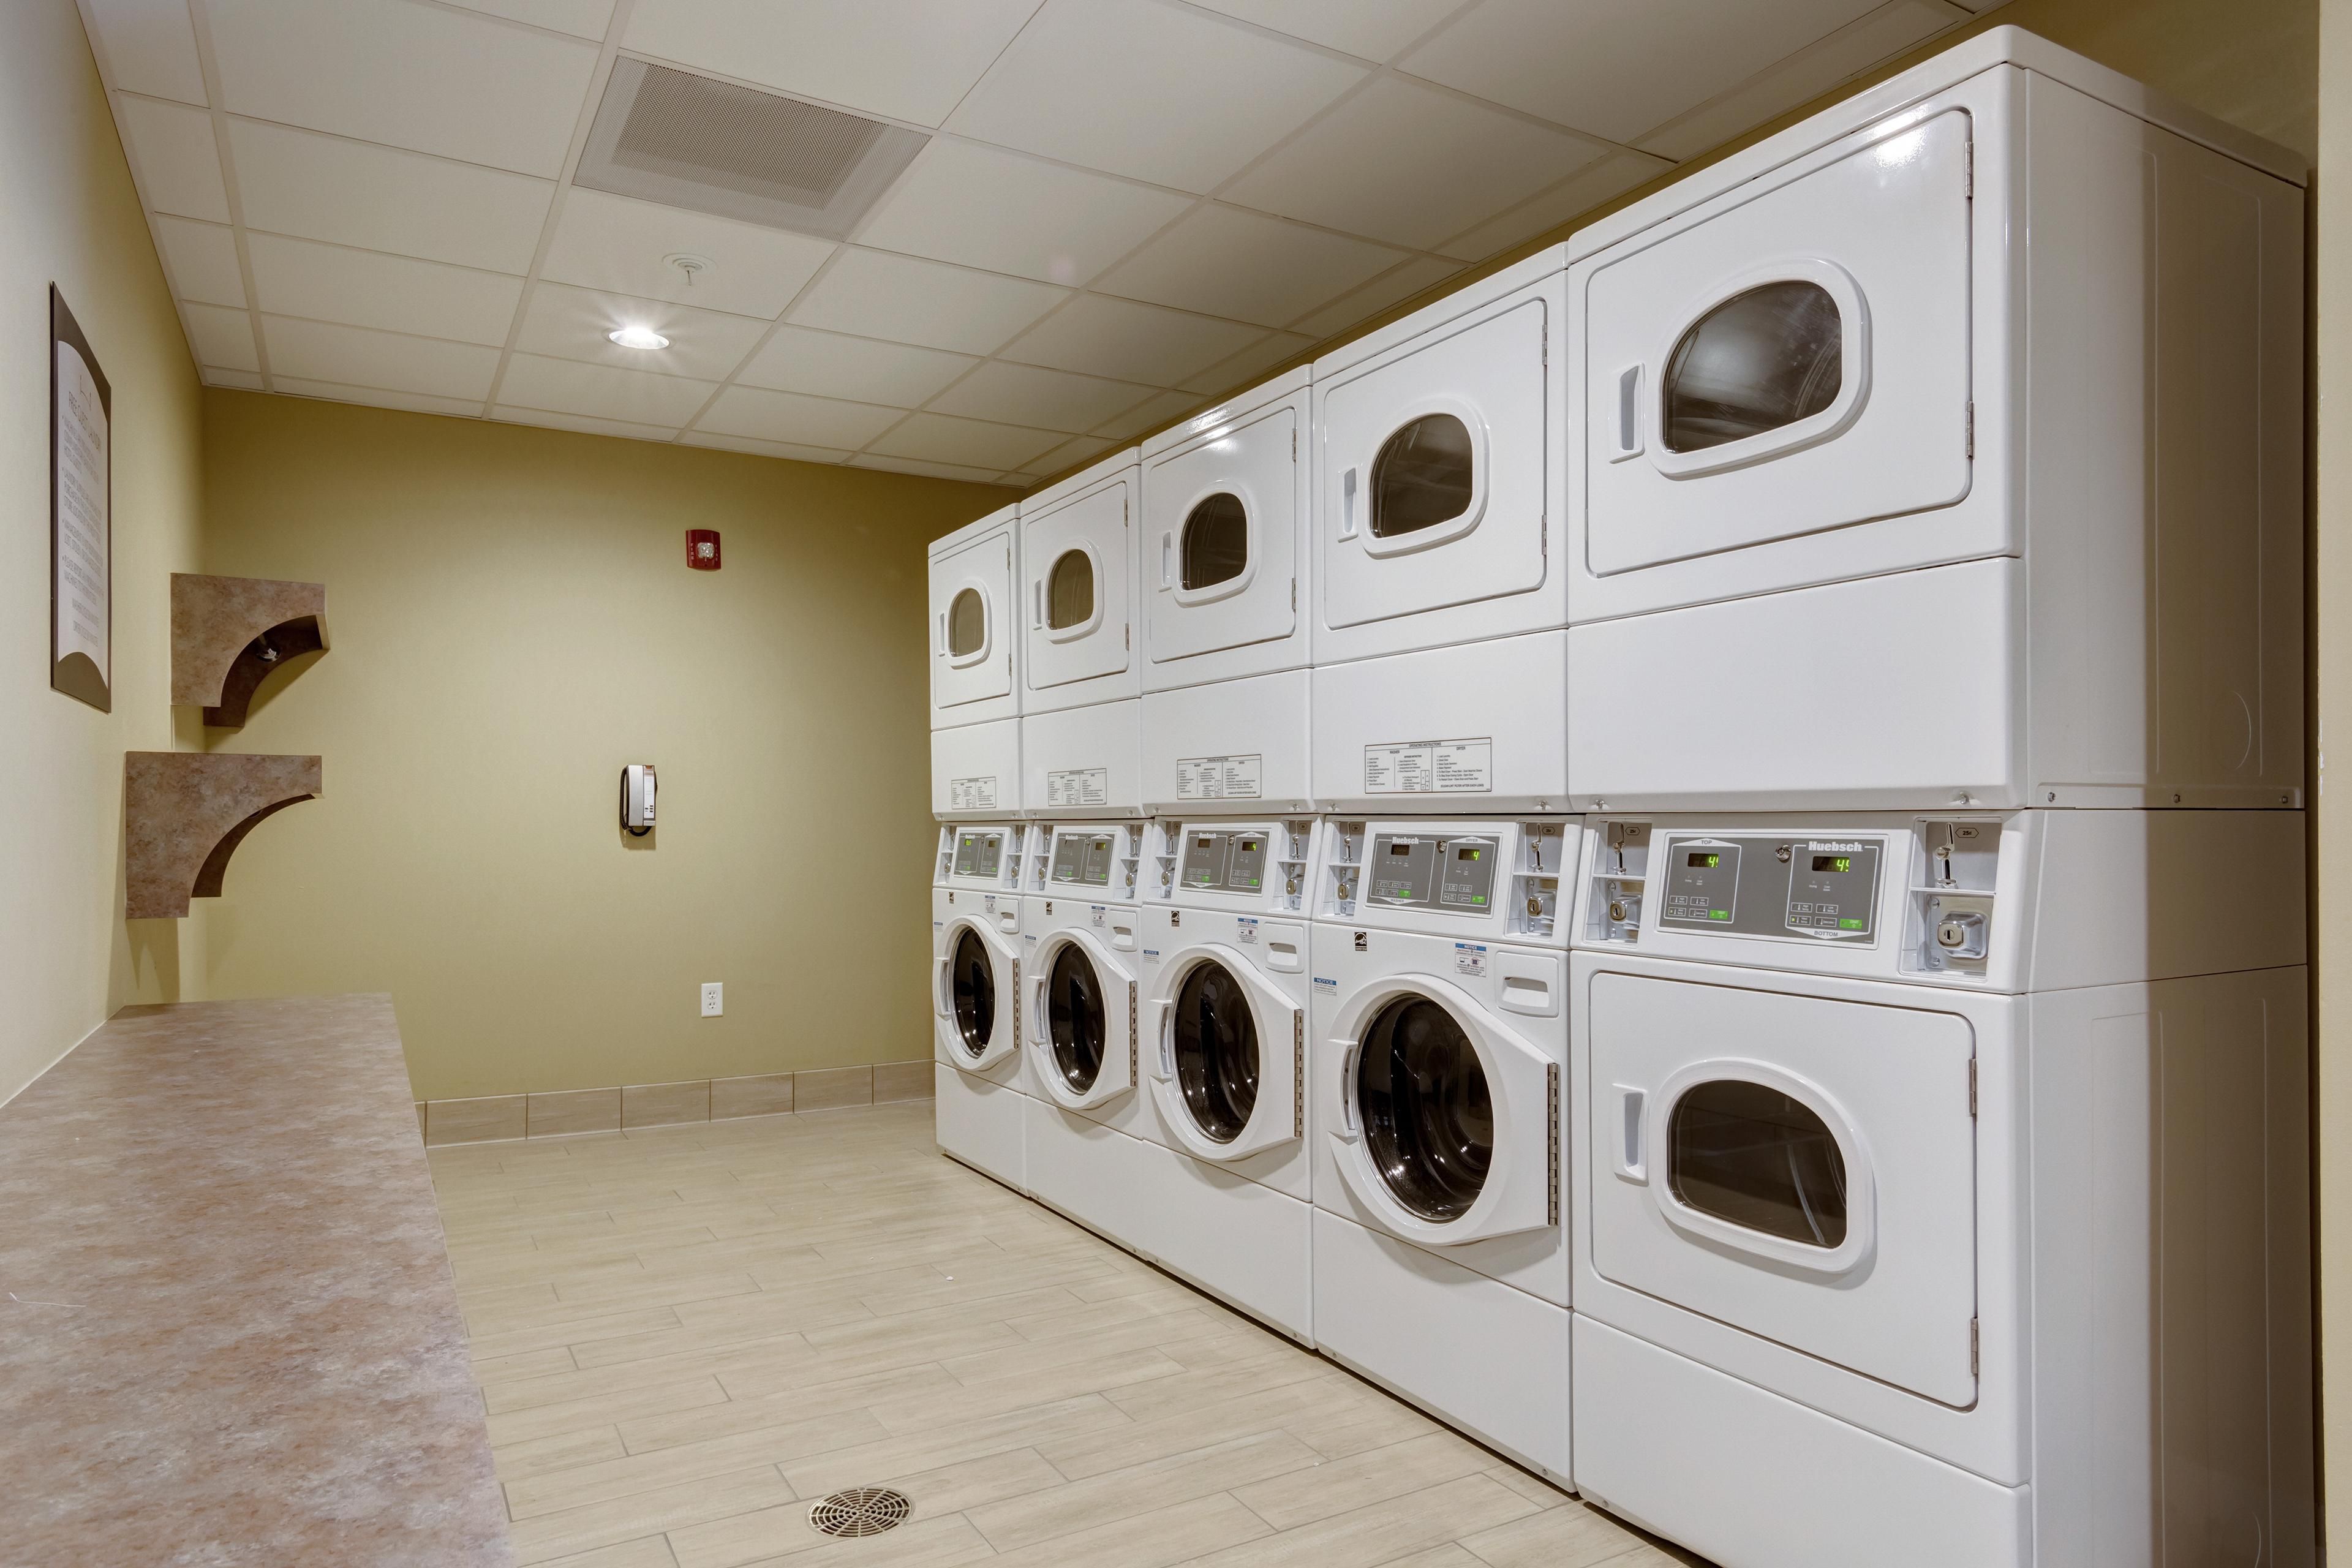 Leave the roll of quarters at home and take advantage of our complimentary laundry facilities! 